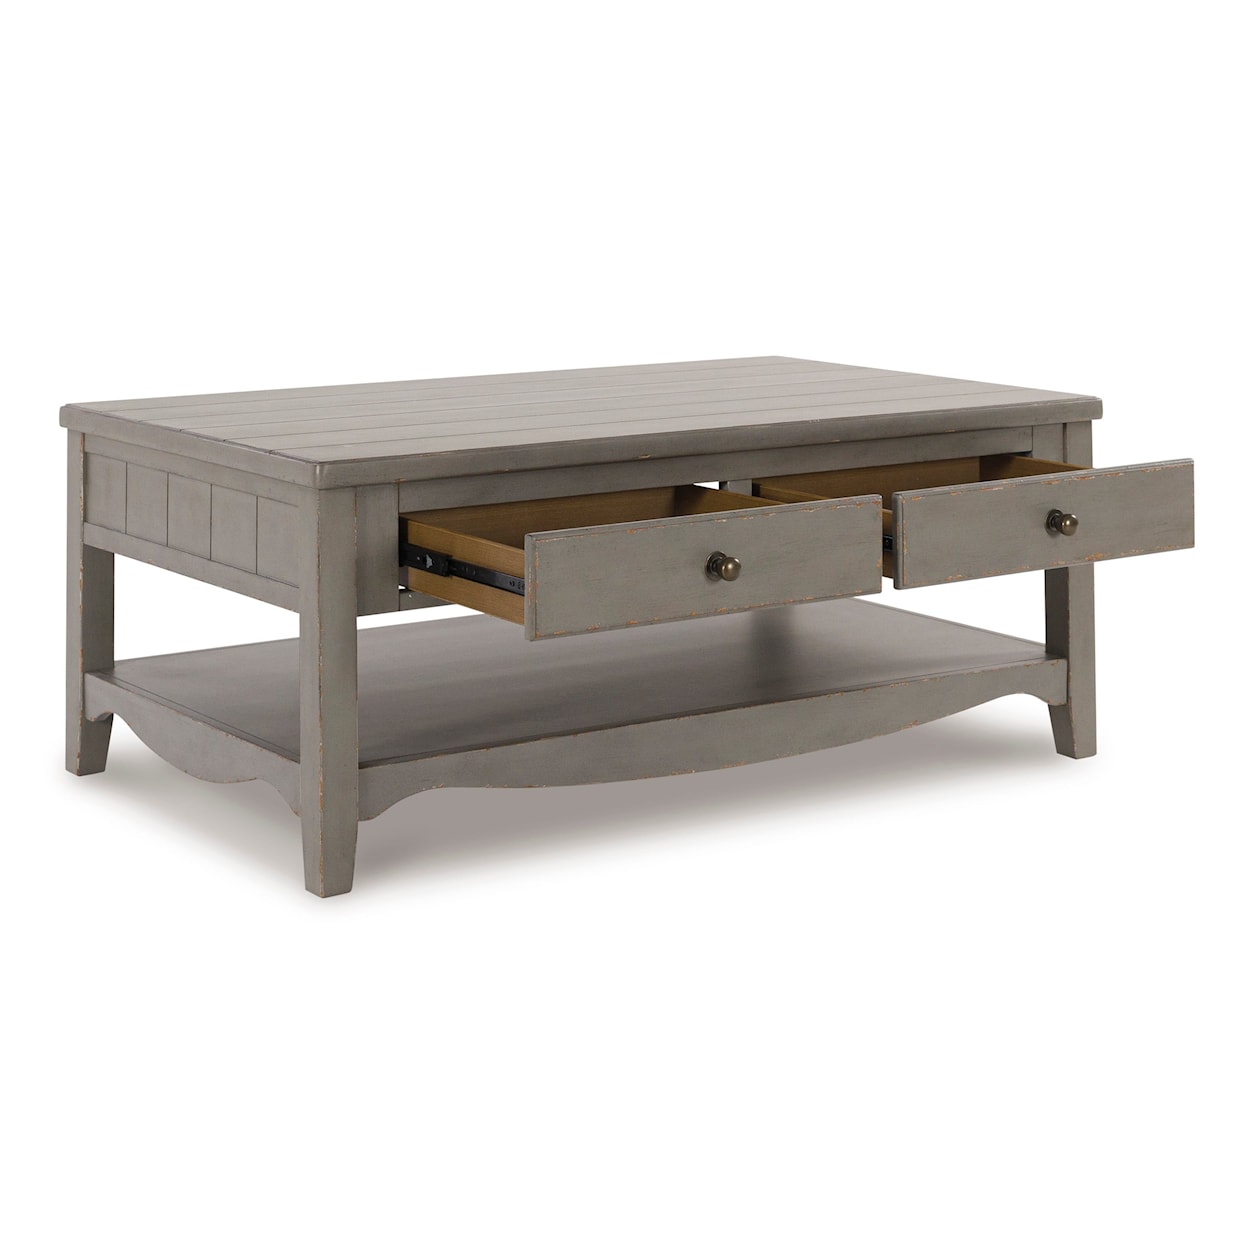 Signature Design by Ashley Charina Coffee Table